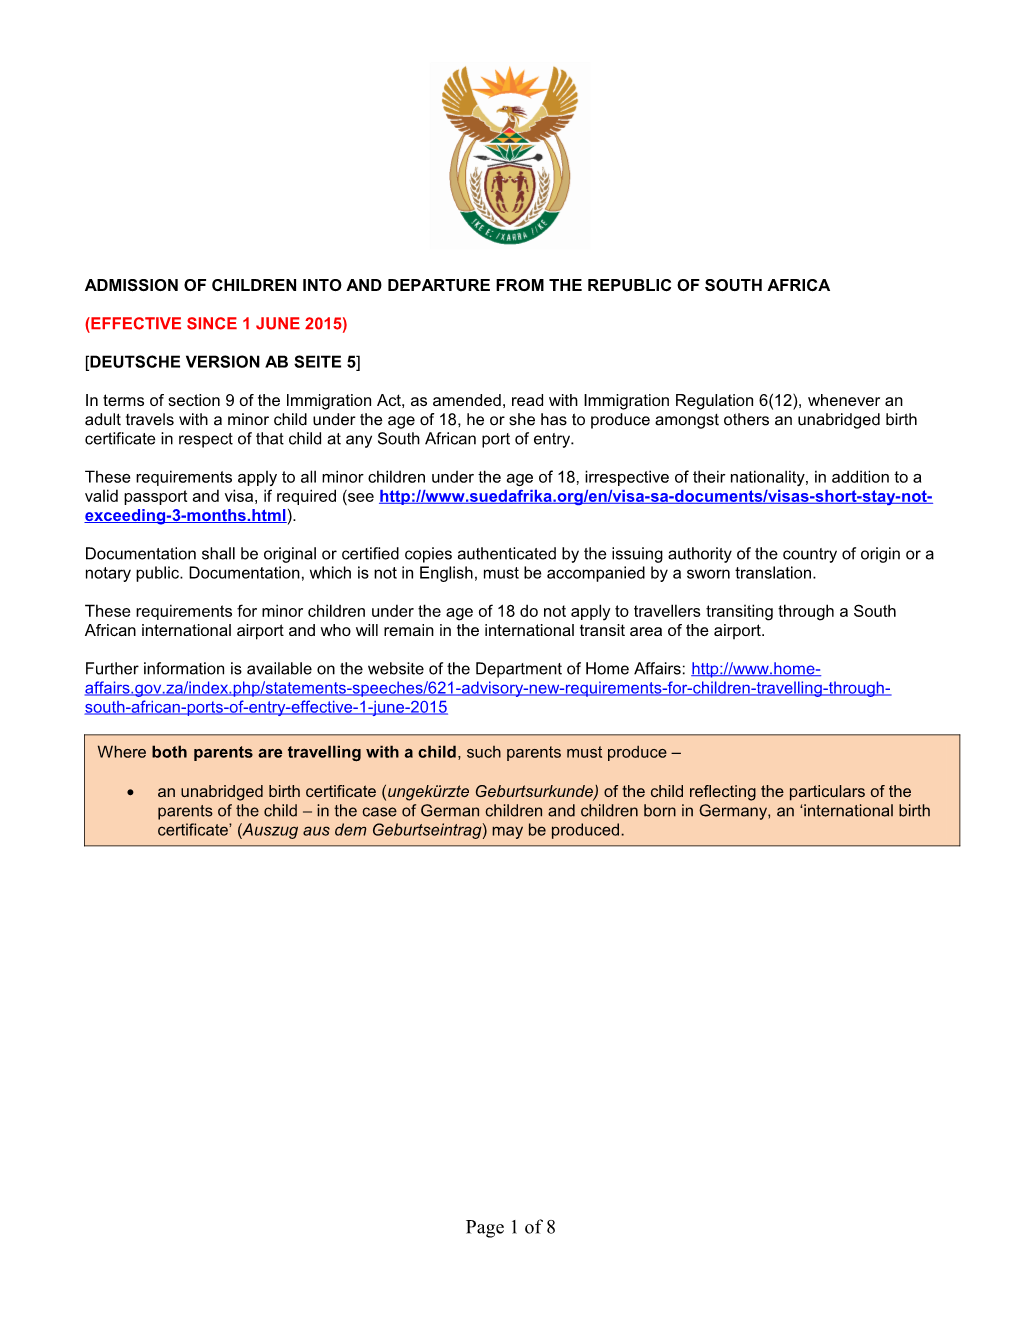 Admission of Children Into and Departure from the Republic of South Africa